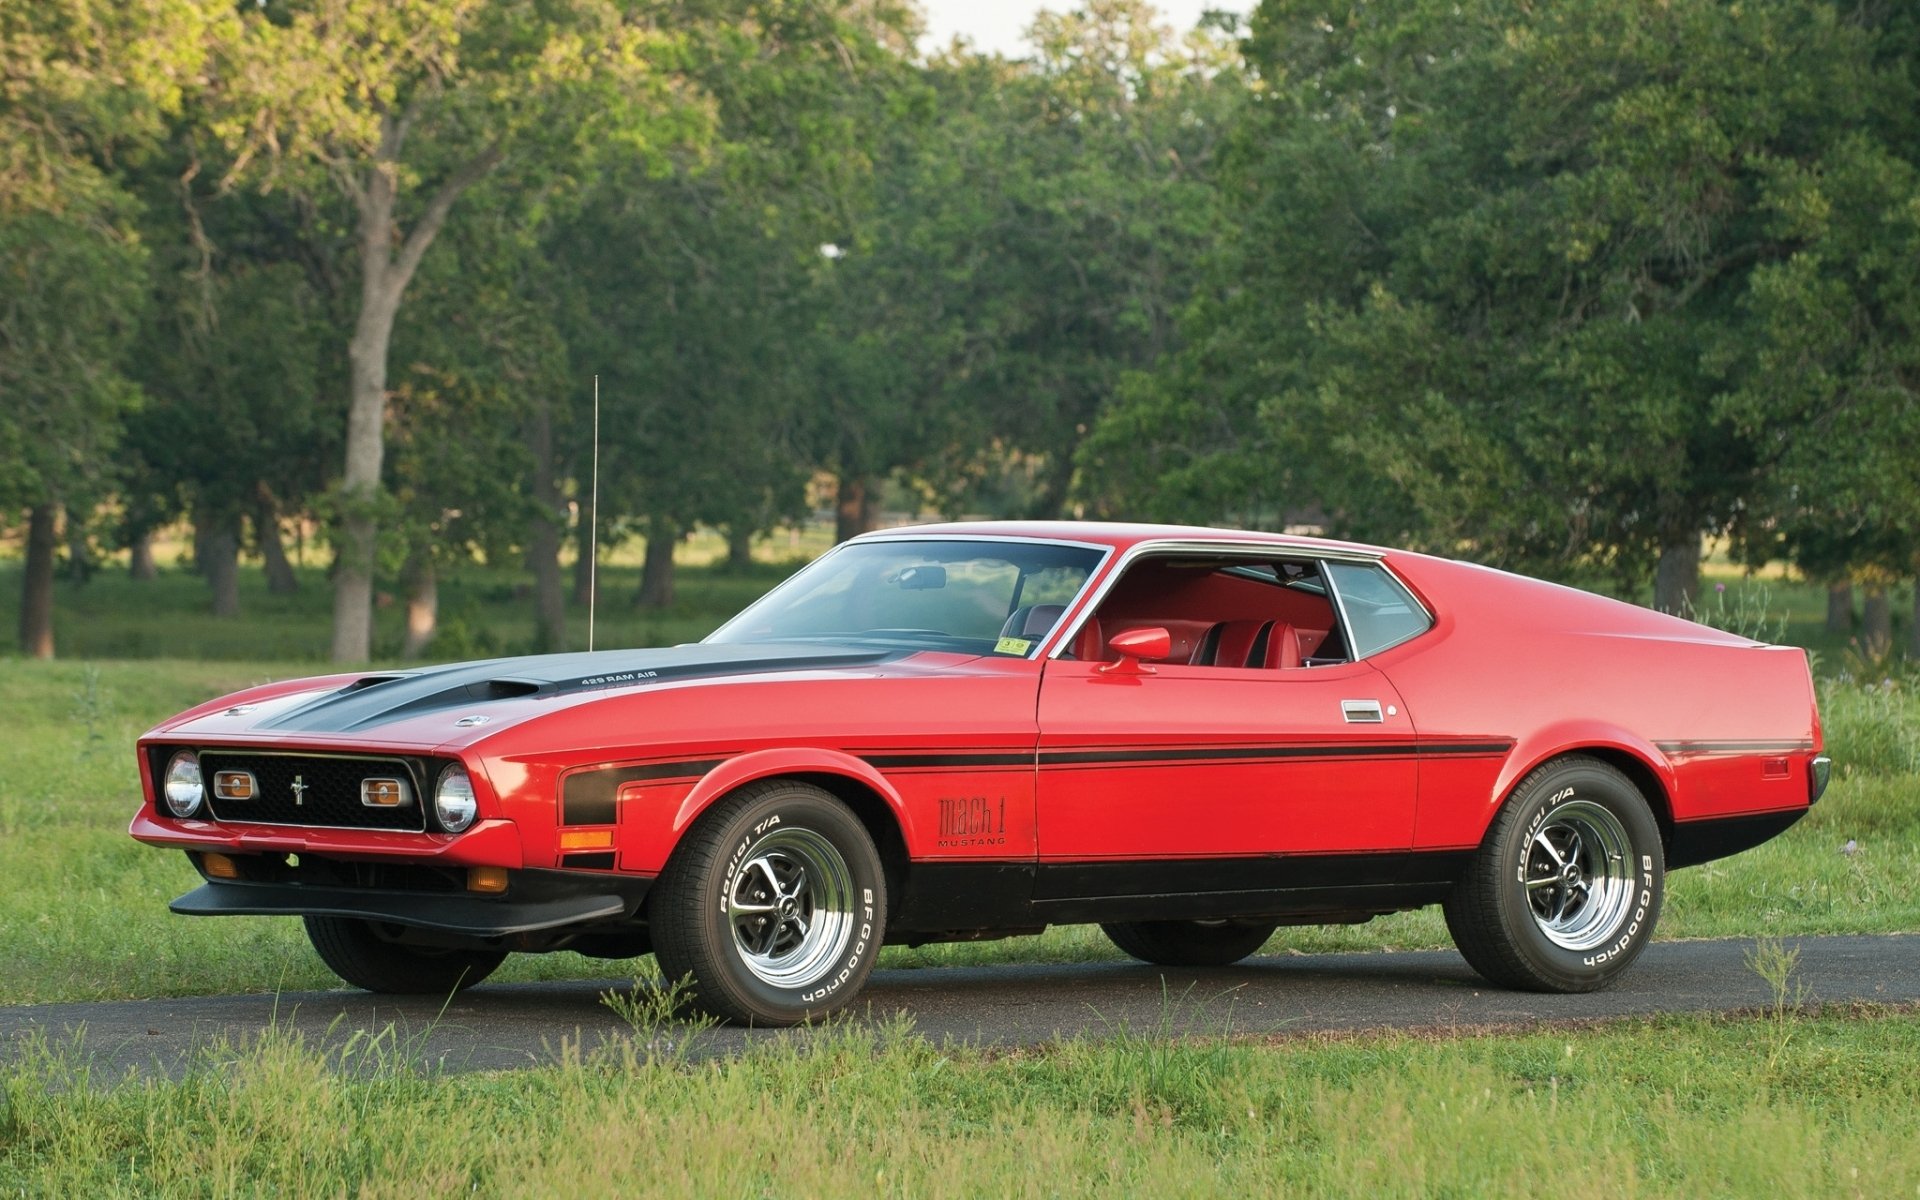 71 Mustang Mach 1 HD Wallpaper | Background Image | 1920x1200